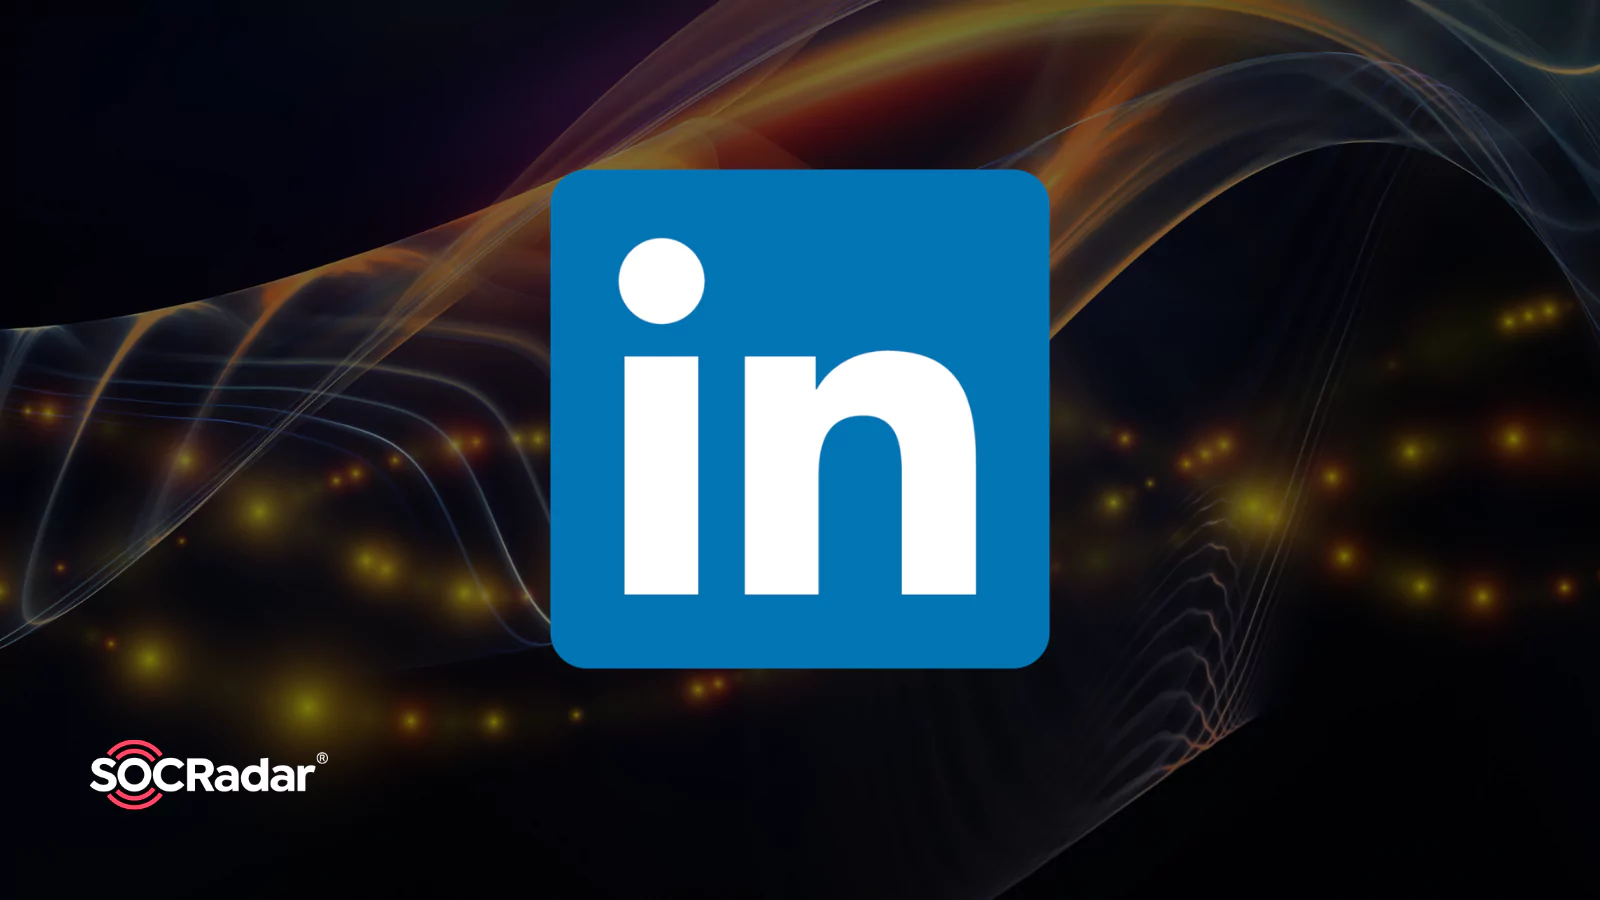 SOCRadar® Cyber Intelligence Inc. | The Rising Anxiety Over LinkedIn Account Takeover Claims